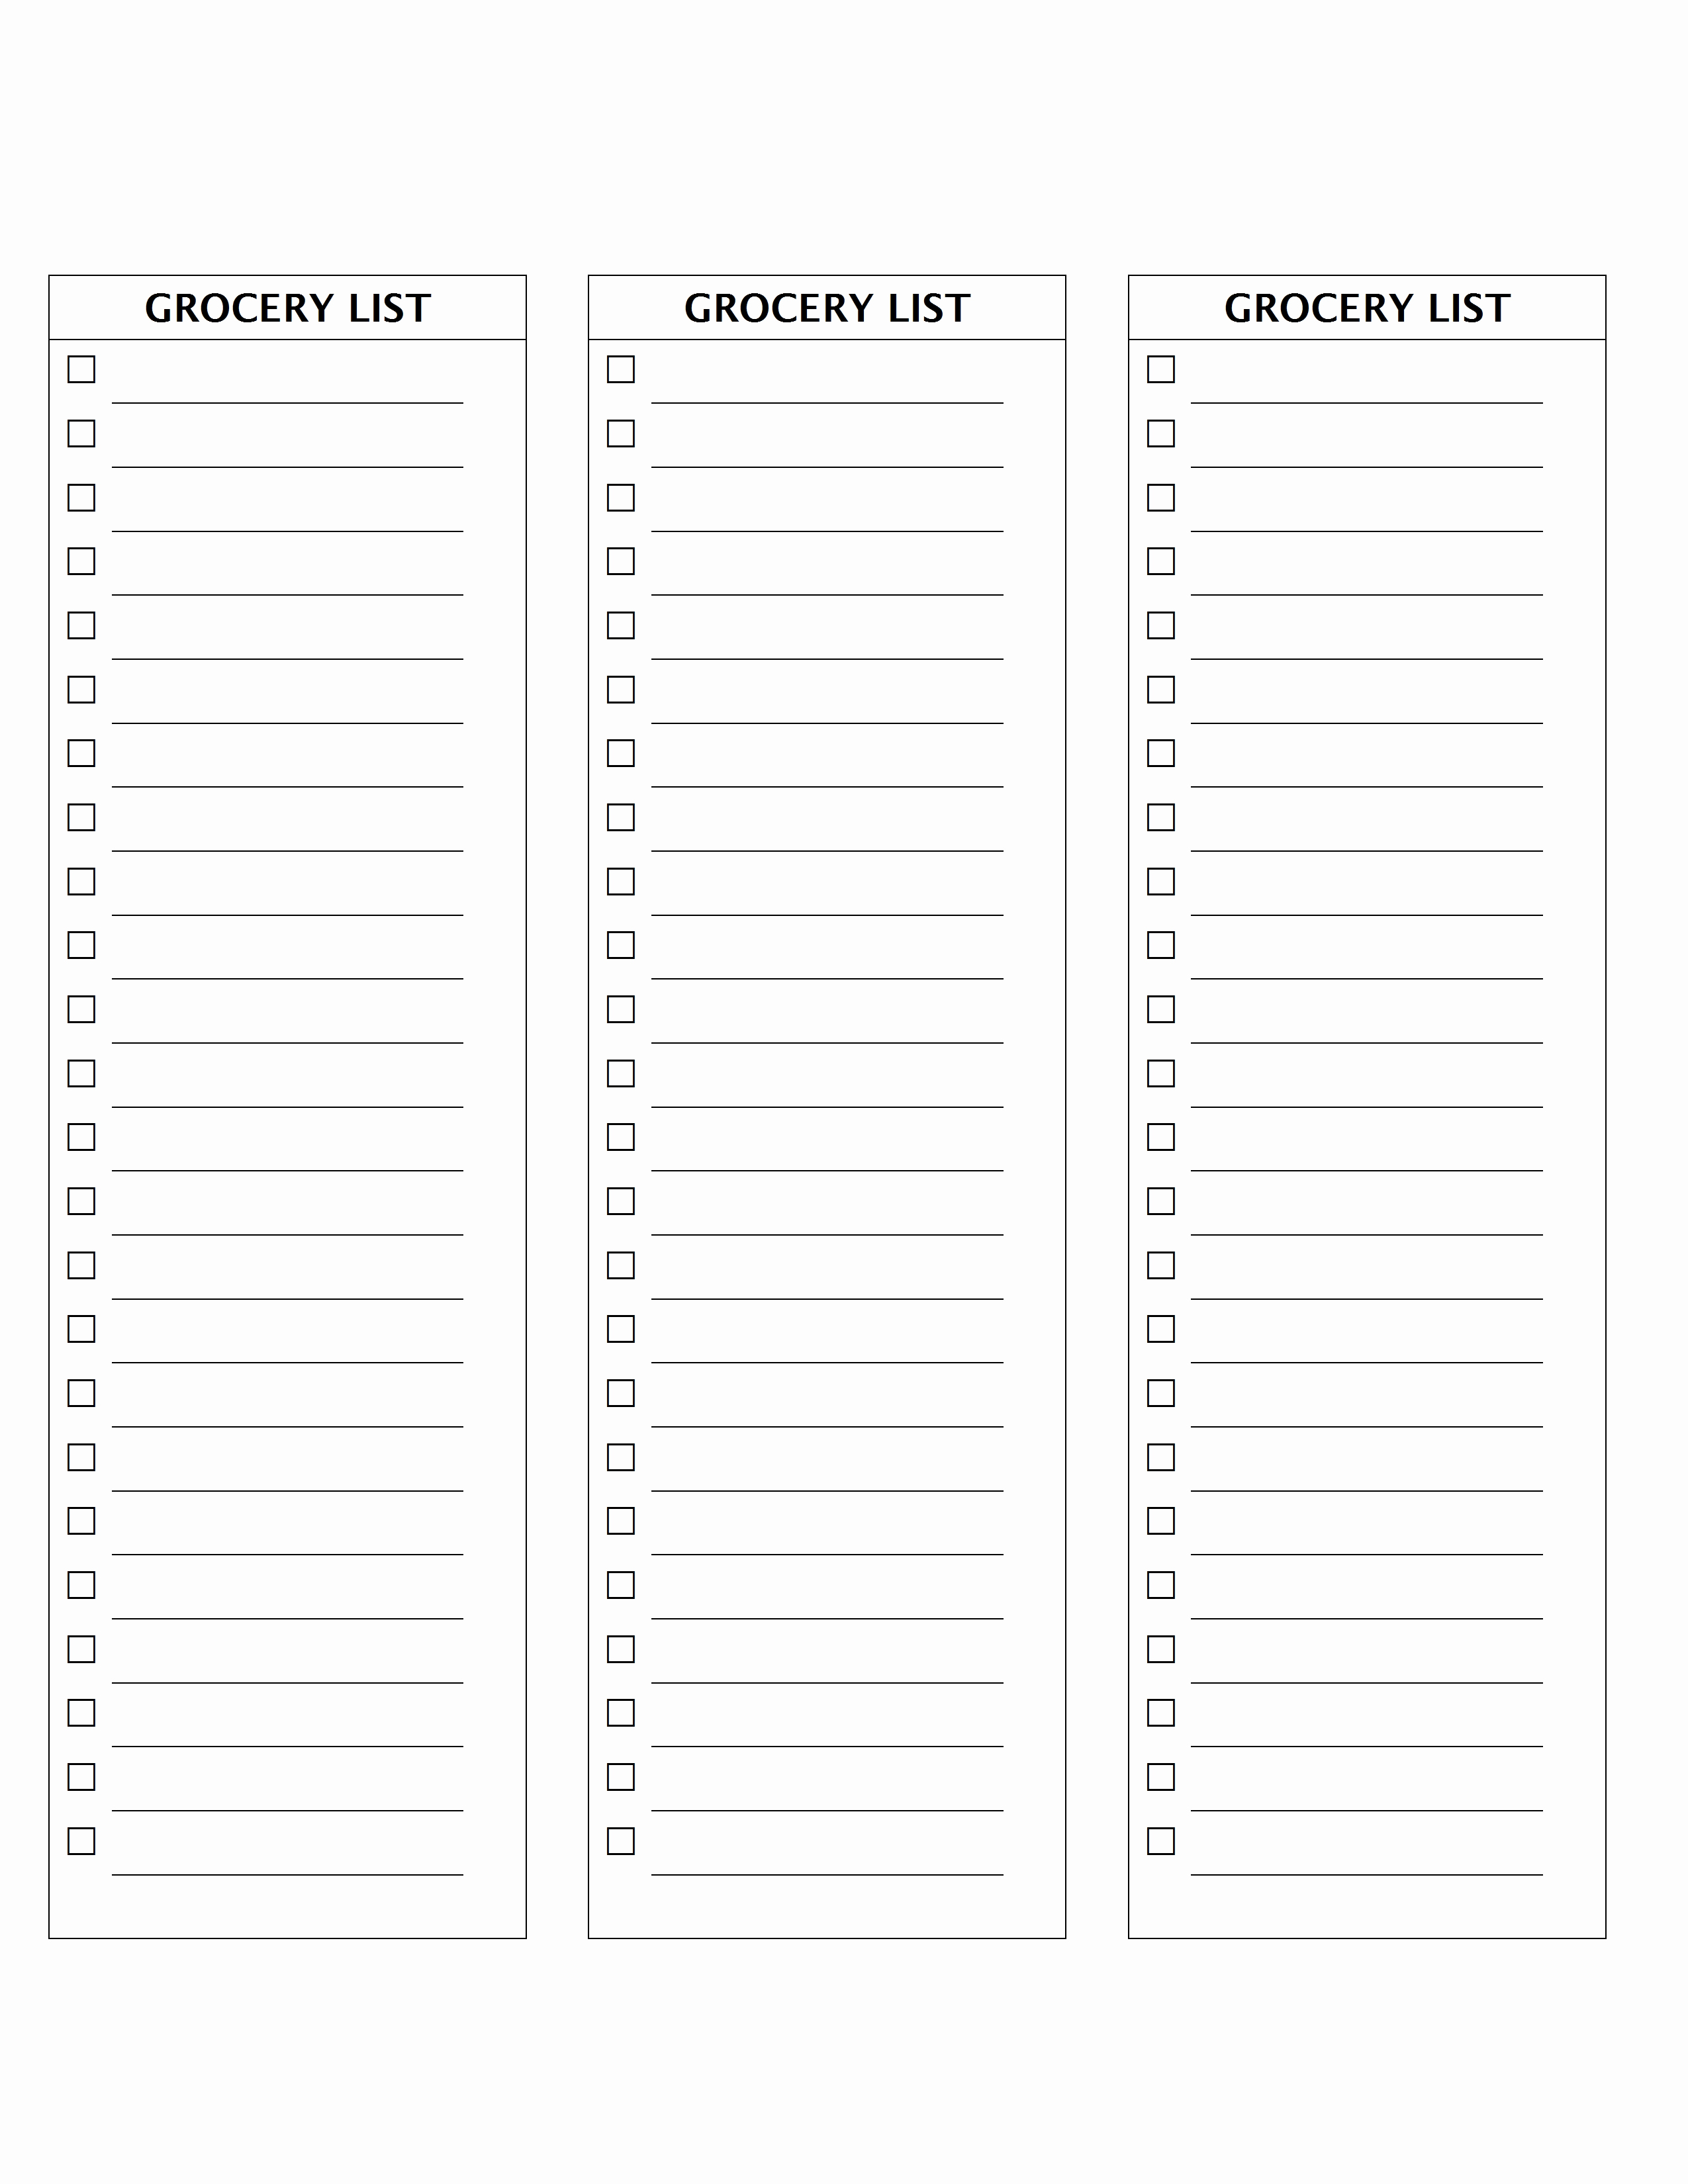 Grocery List Template Word Fresh Grocery List Template